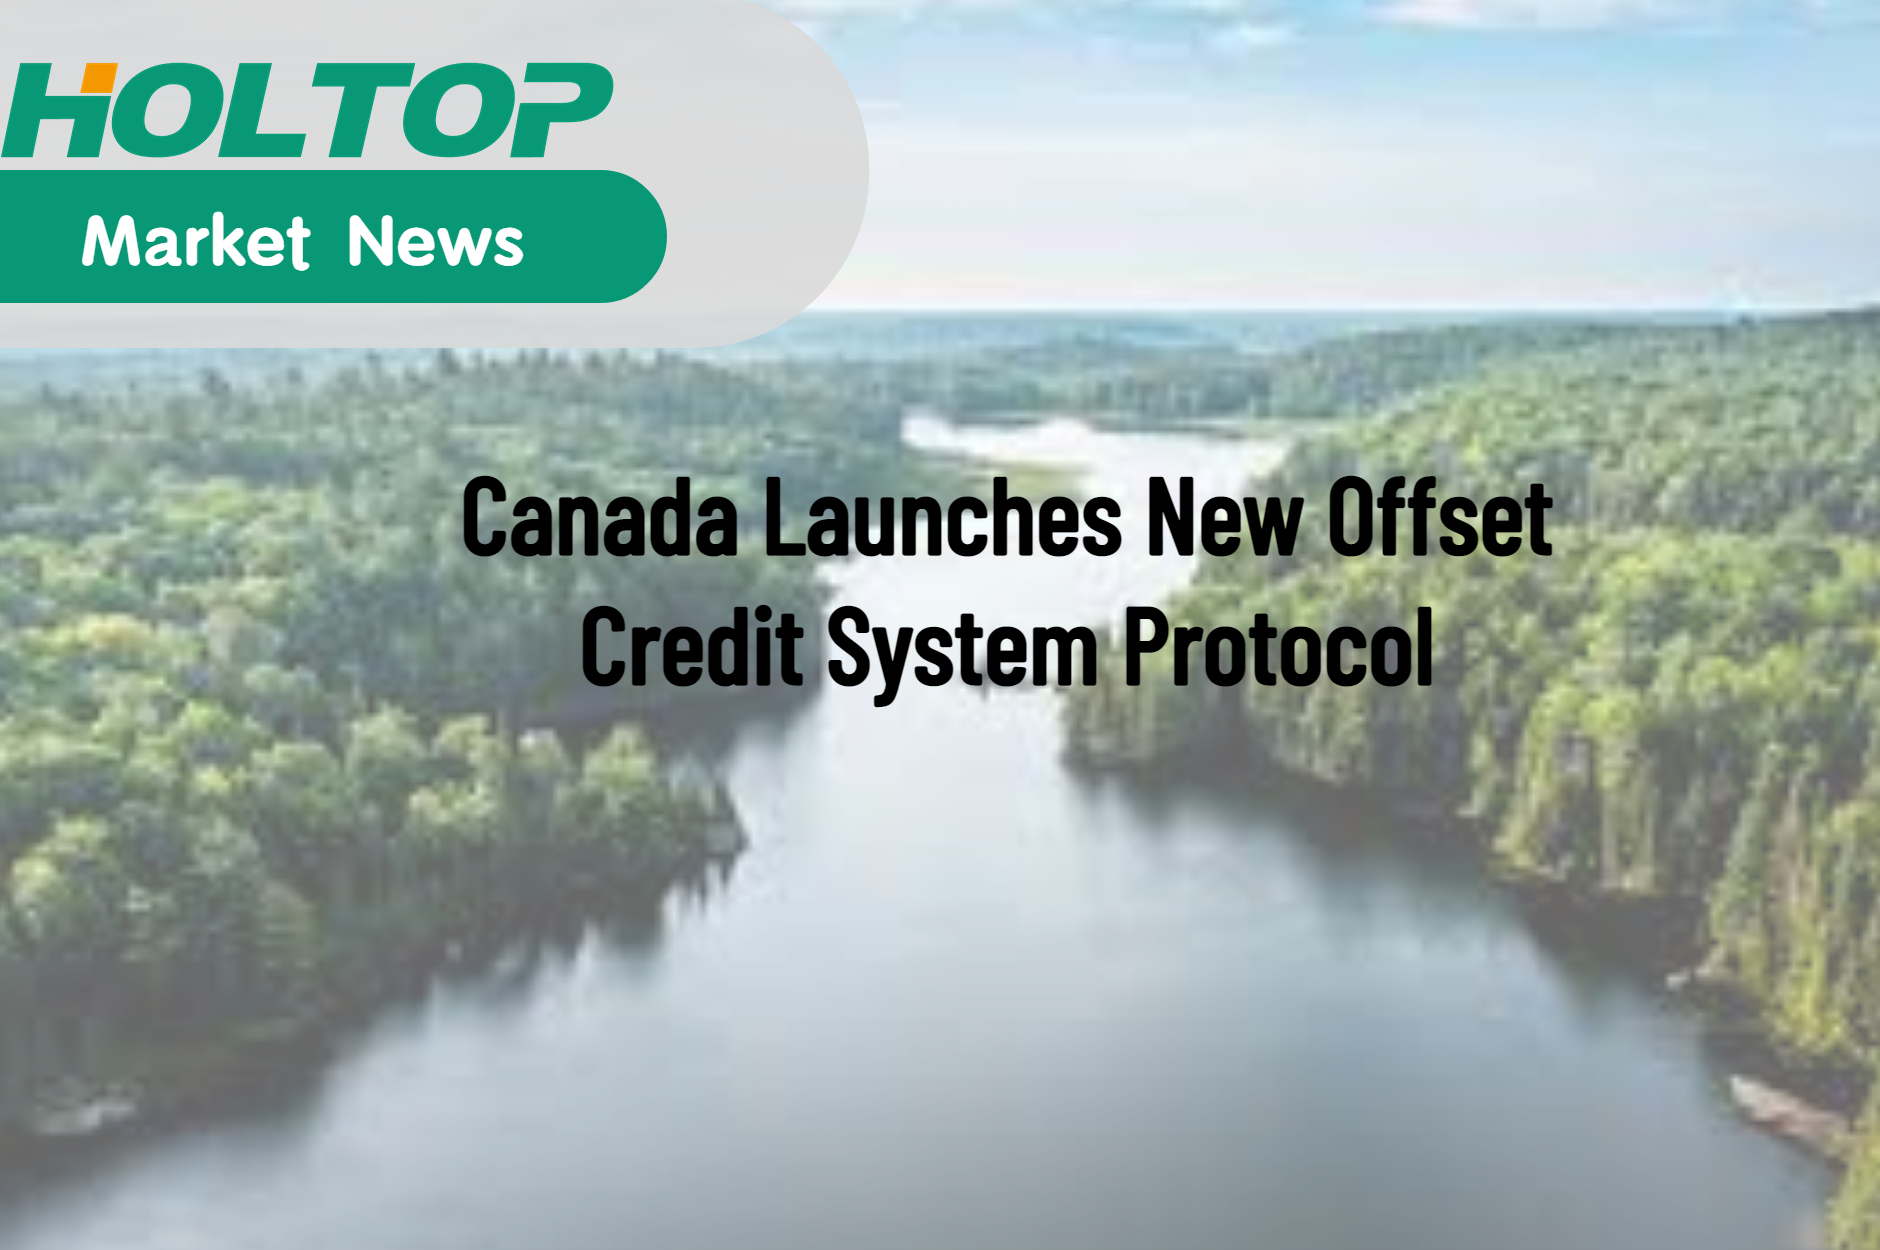 Canada Launches New Offset Credit System Protocol